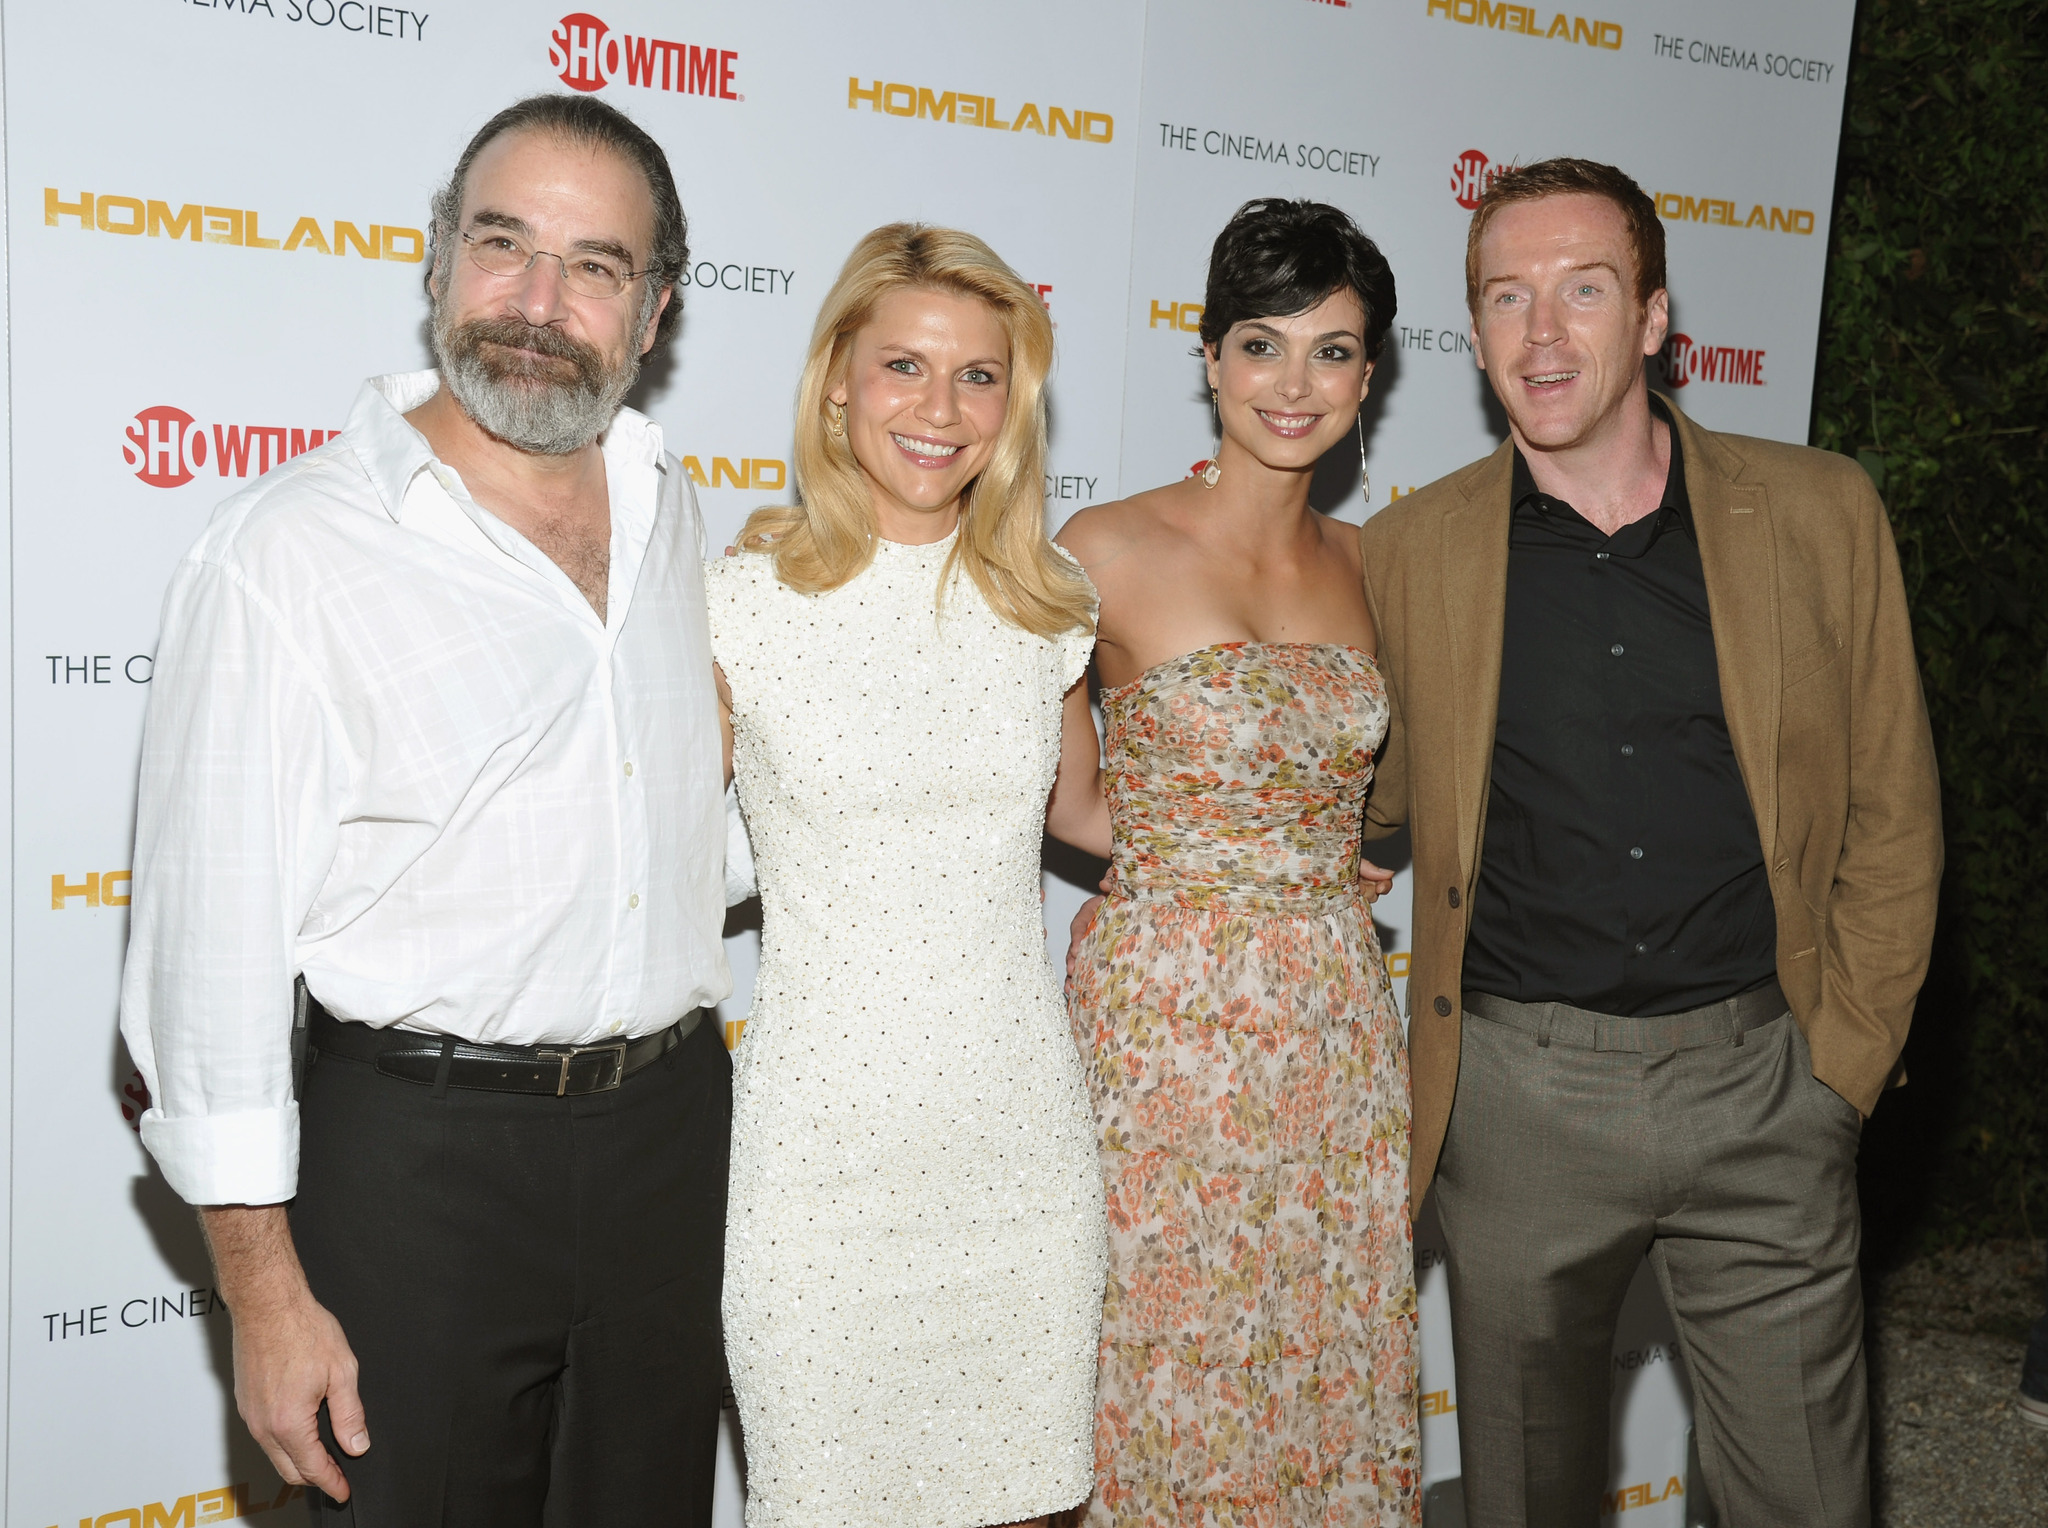 Claire Danes, Mandy Patinkin, Damian Lewis and Morena Baccarin